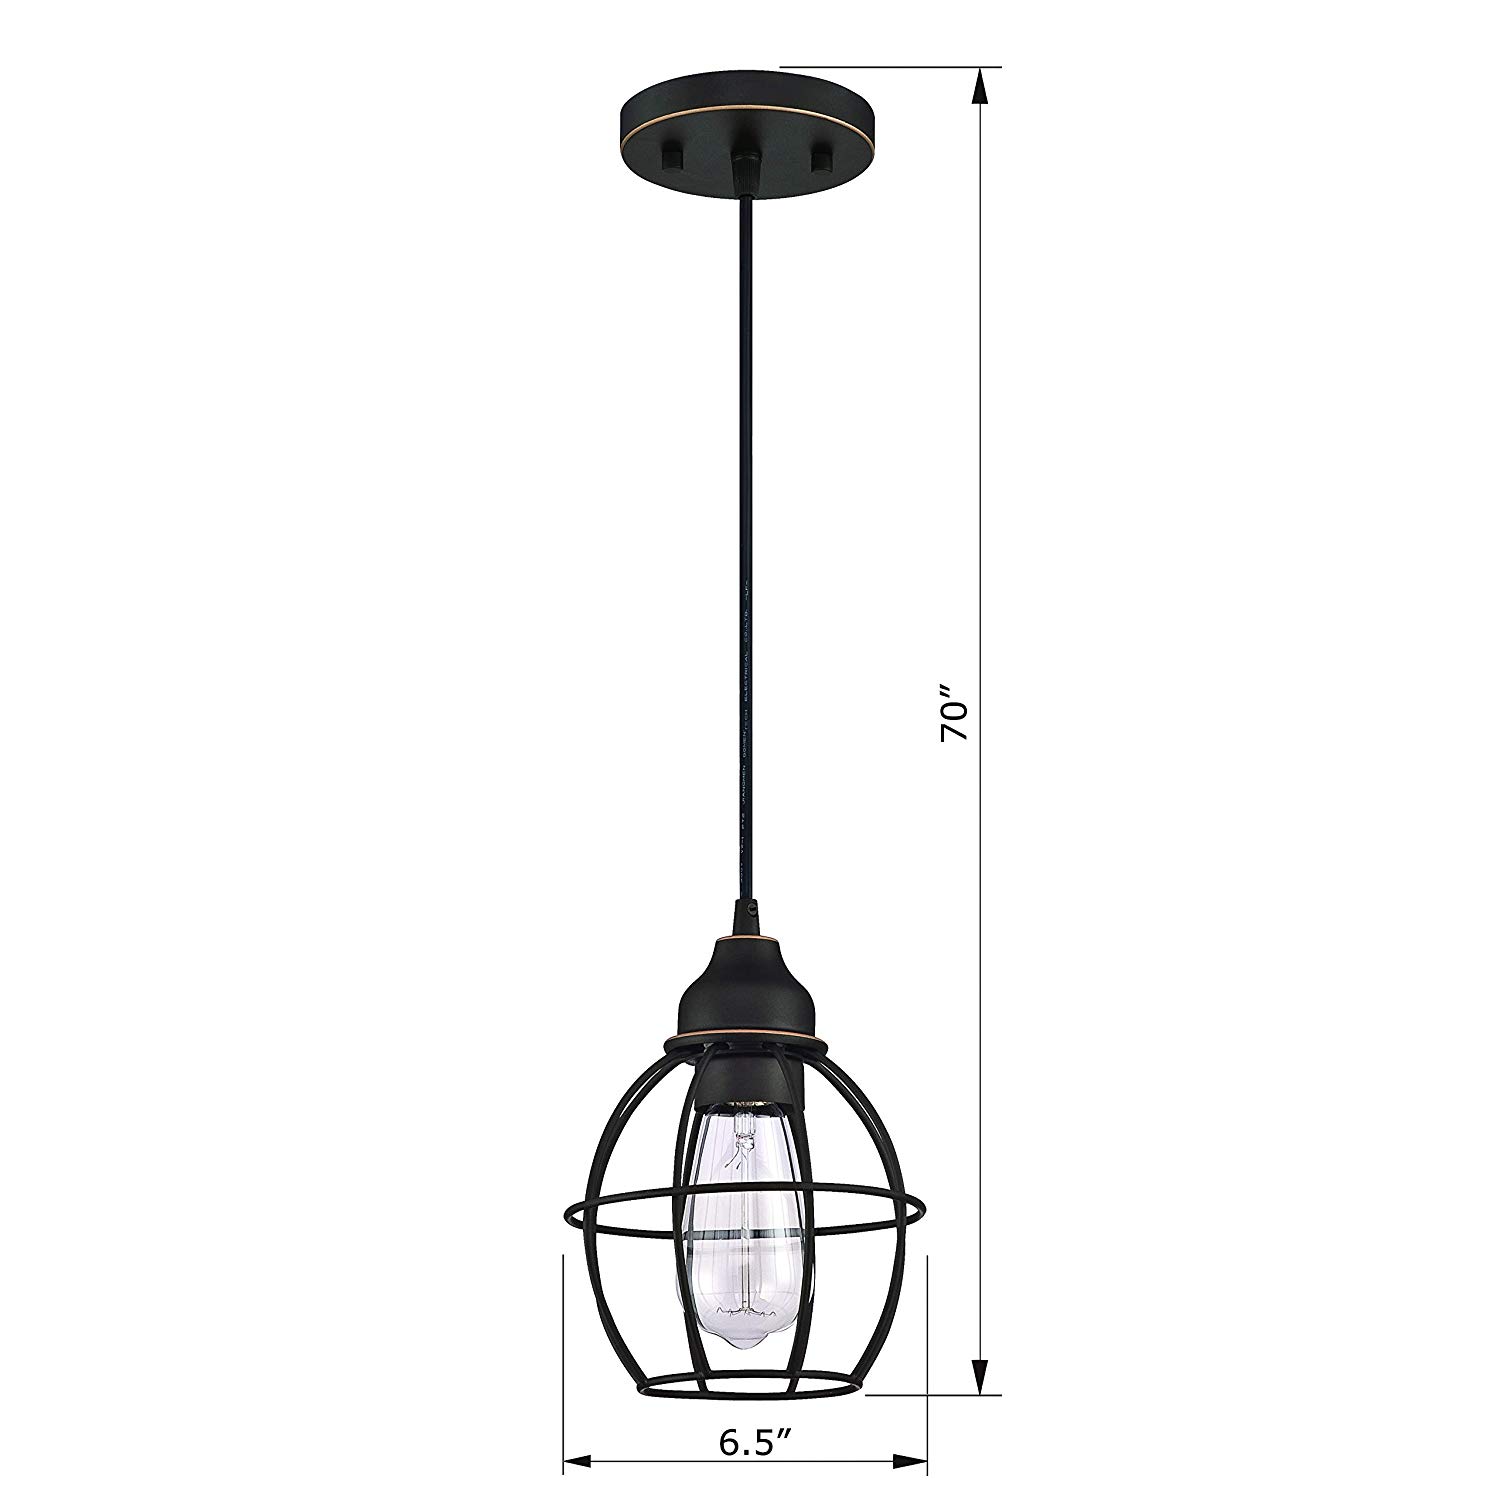 LIT-PaTH Pendant Lighting Fixture for Kitchen and Dining Room, Hanging Lighting Fixture, E26 Medium Base, Metal Construction with Oil Rubbed Bronze Finish, Bulb not Included, 2-Pack